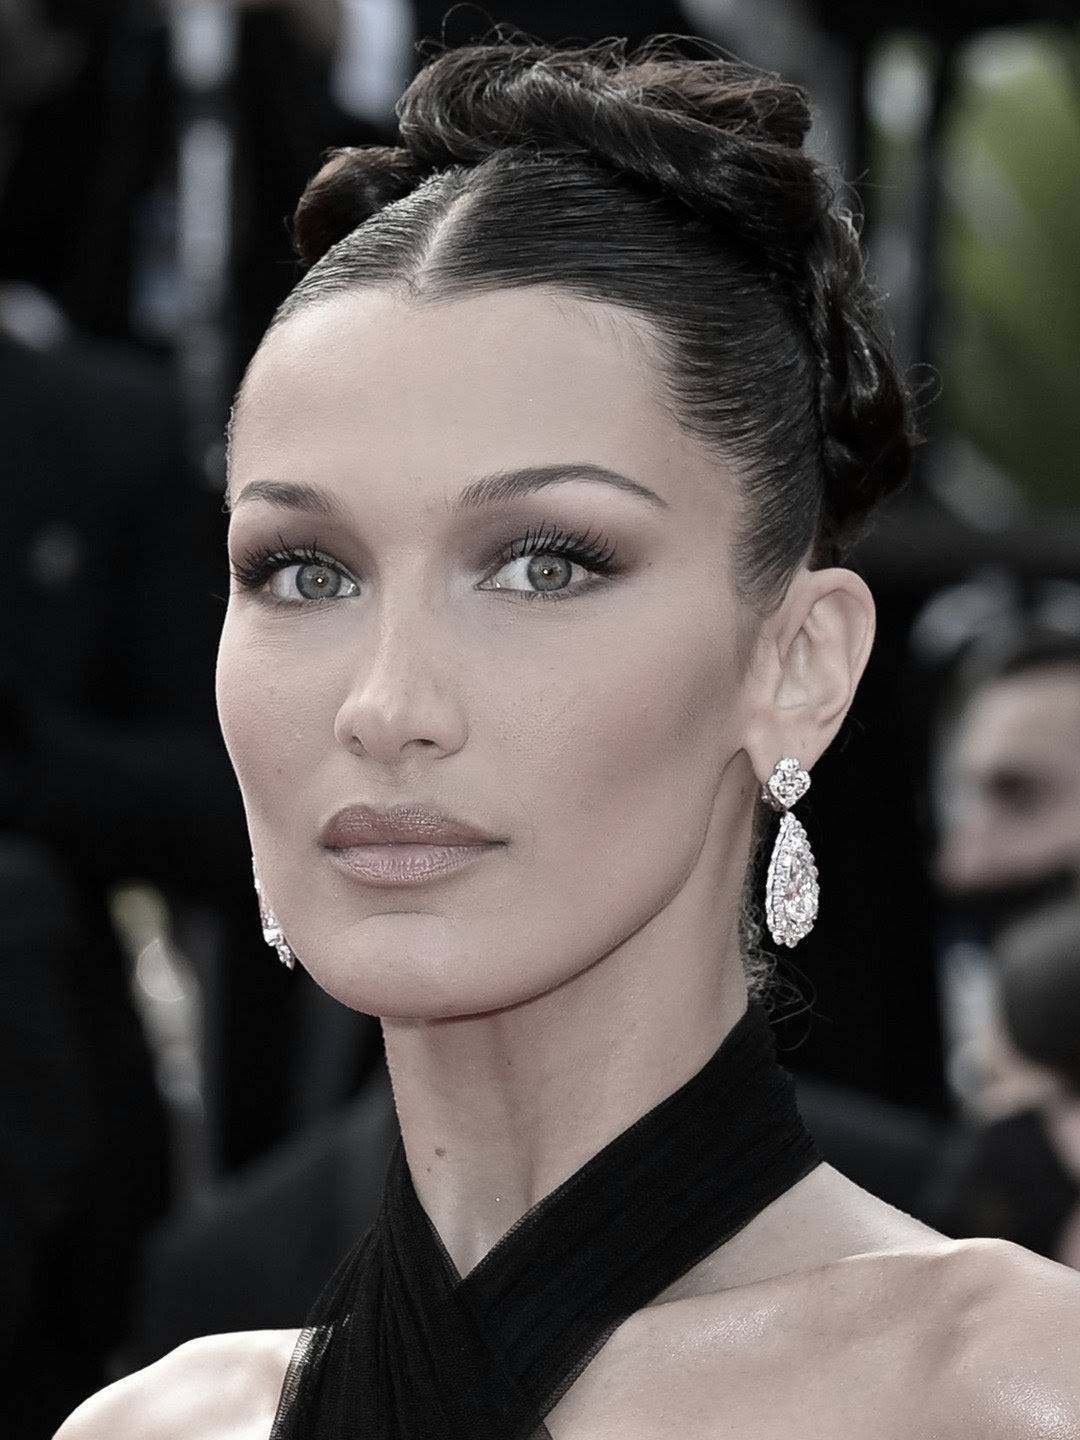 Get to Know Bella Hadid Biography, Net Worth, Family Members, and Age